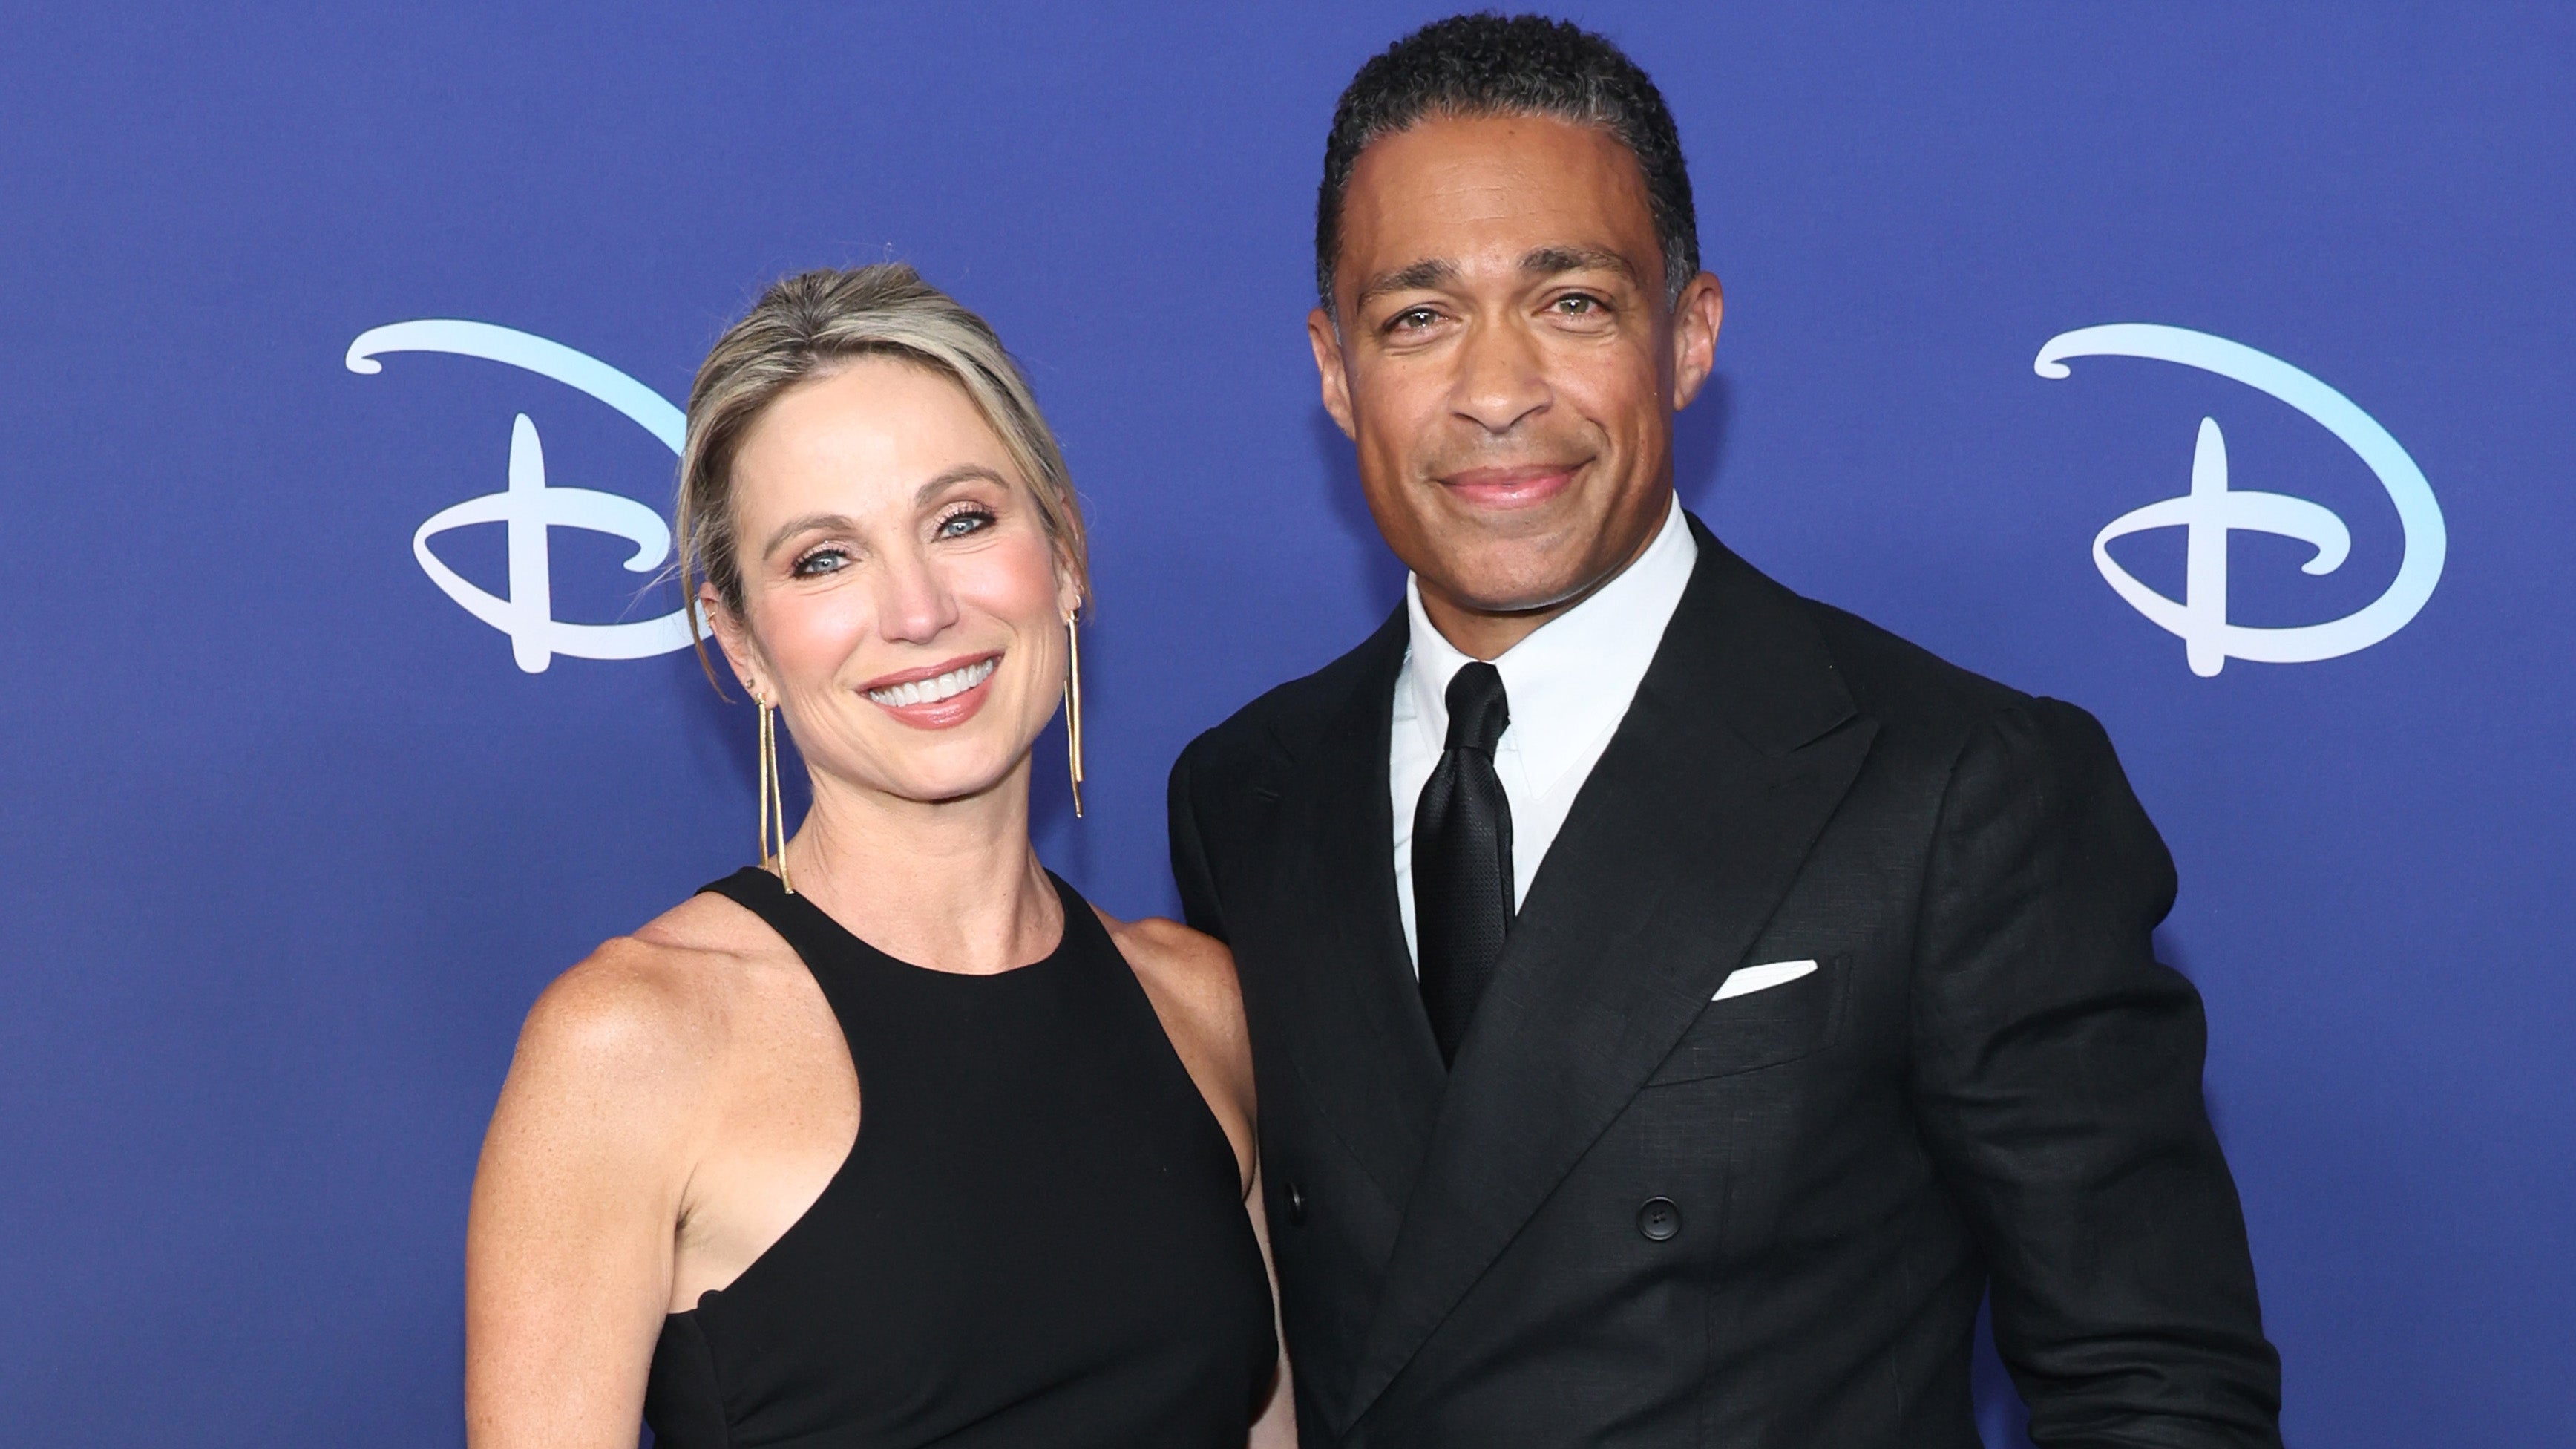  Amy Robach and T.J. Holmes' Romance Revealed